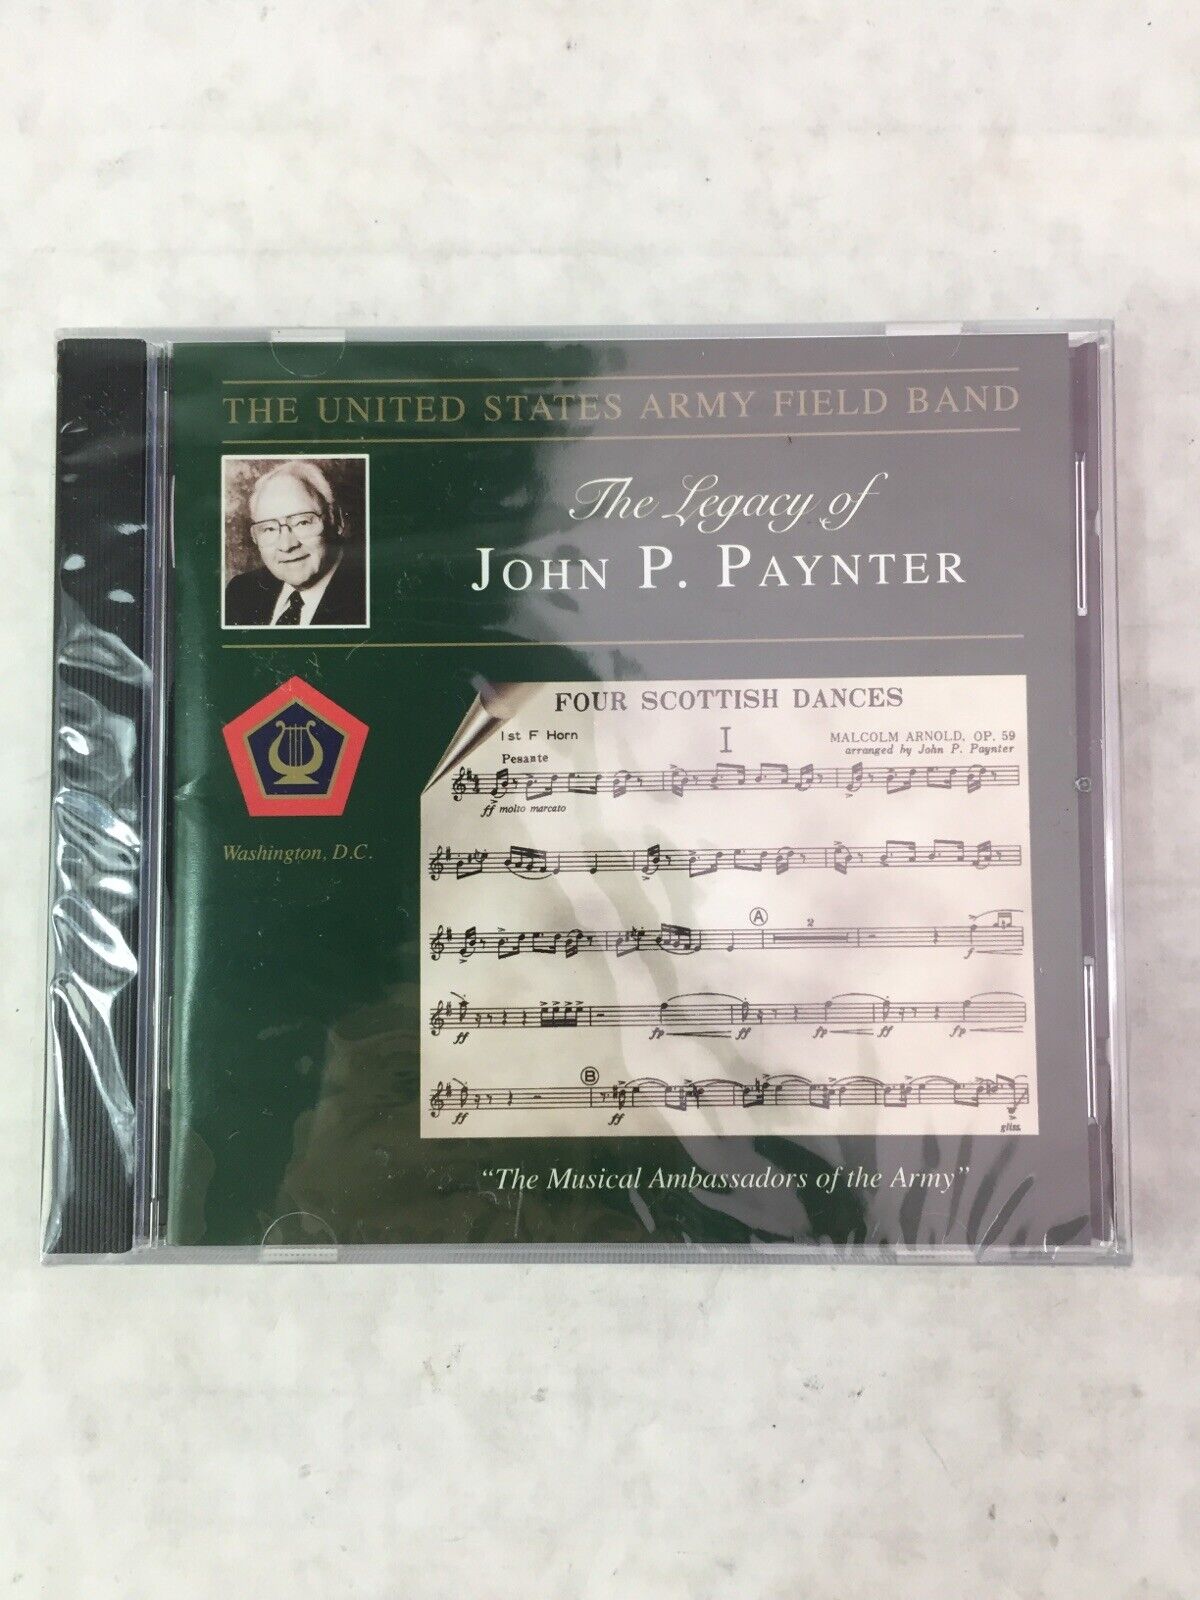 The United States Army Field Band: The Legacy of John P. Paynter